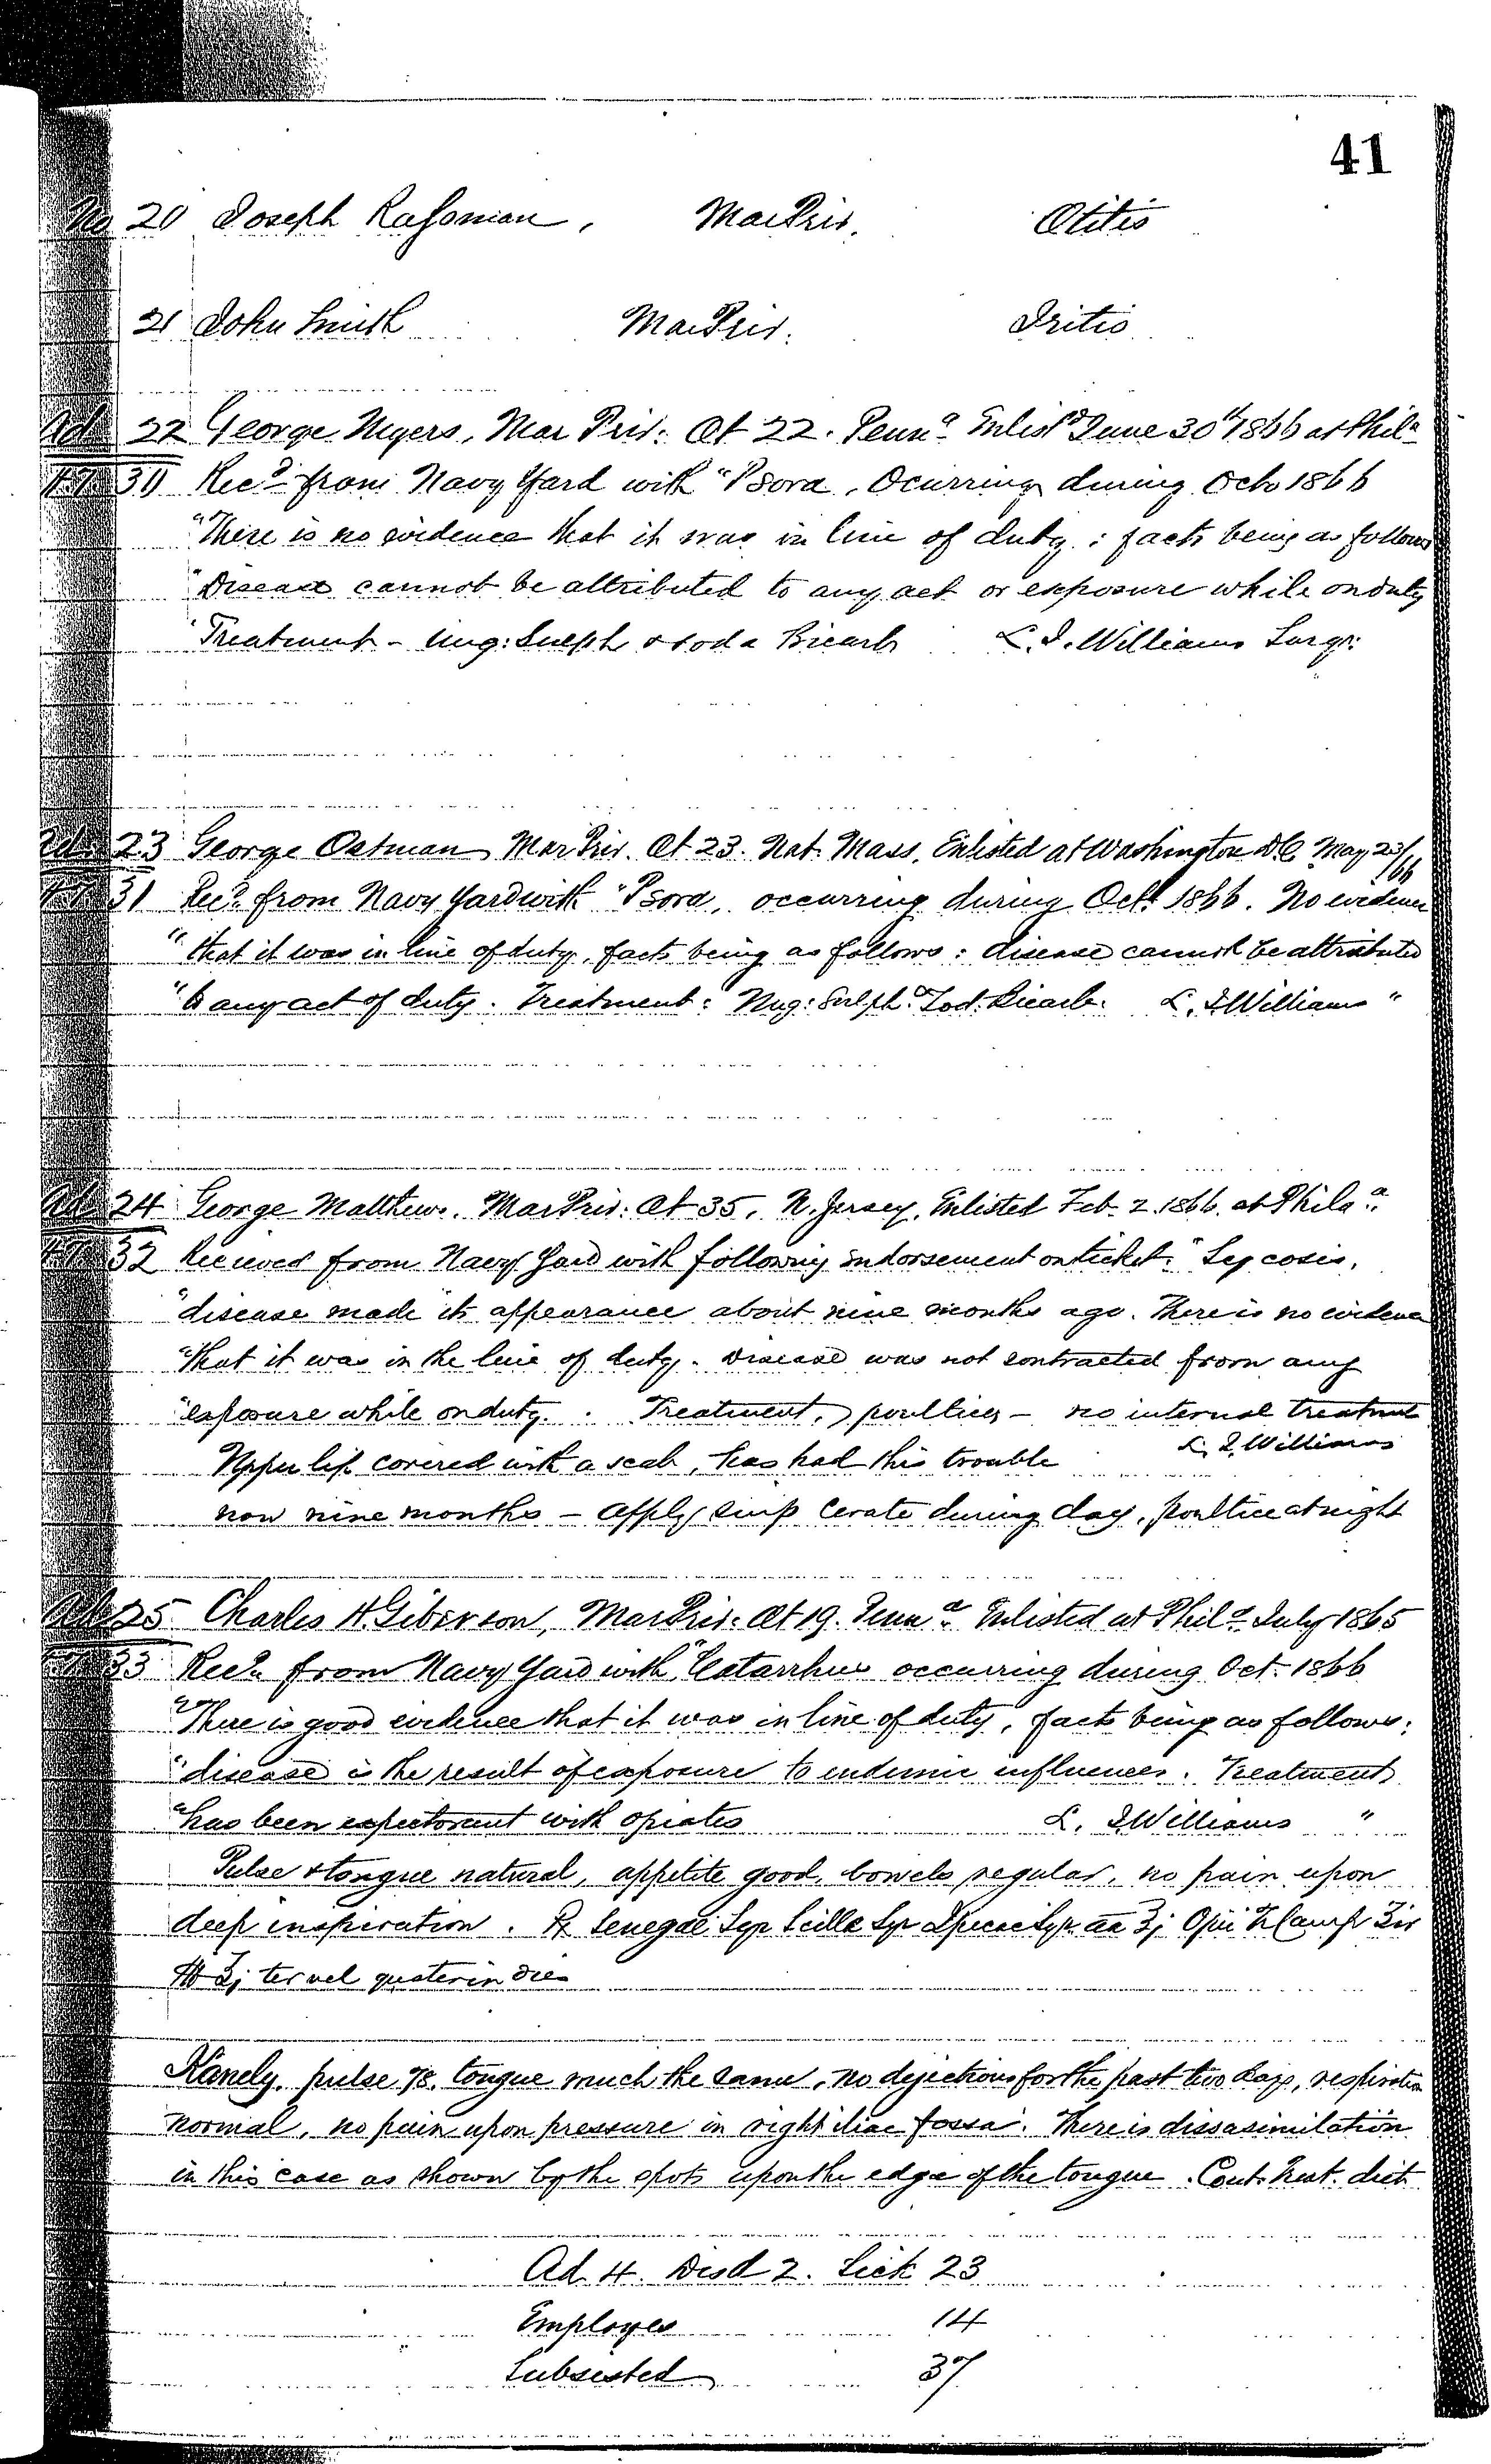 Patients in the Naval Hospital, Washington DC, on October 30, 1866, page 2 of 2, in the Medical Journal, October 1, 1866 to March 20, 1867